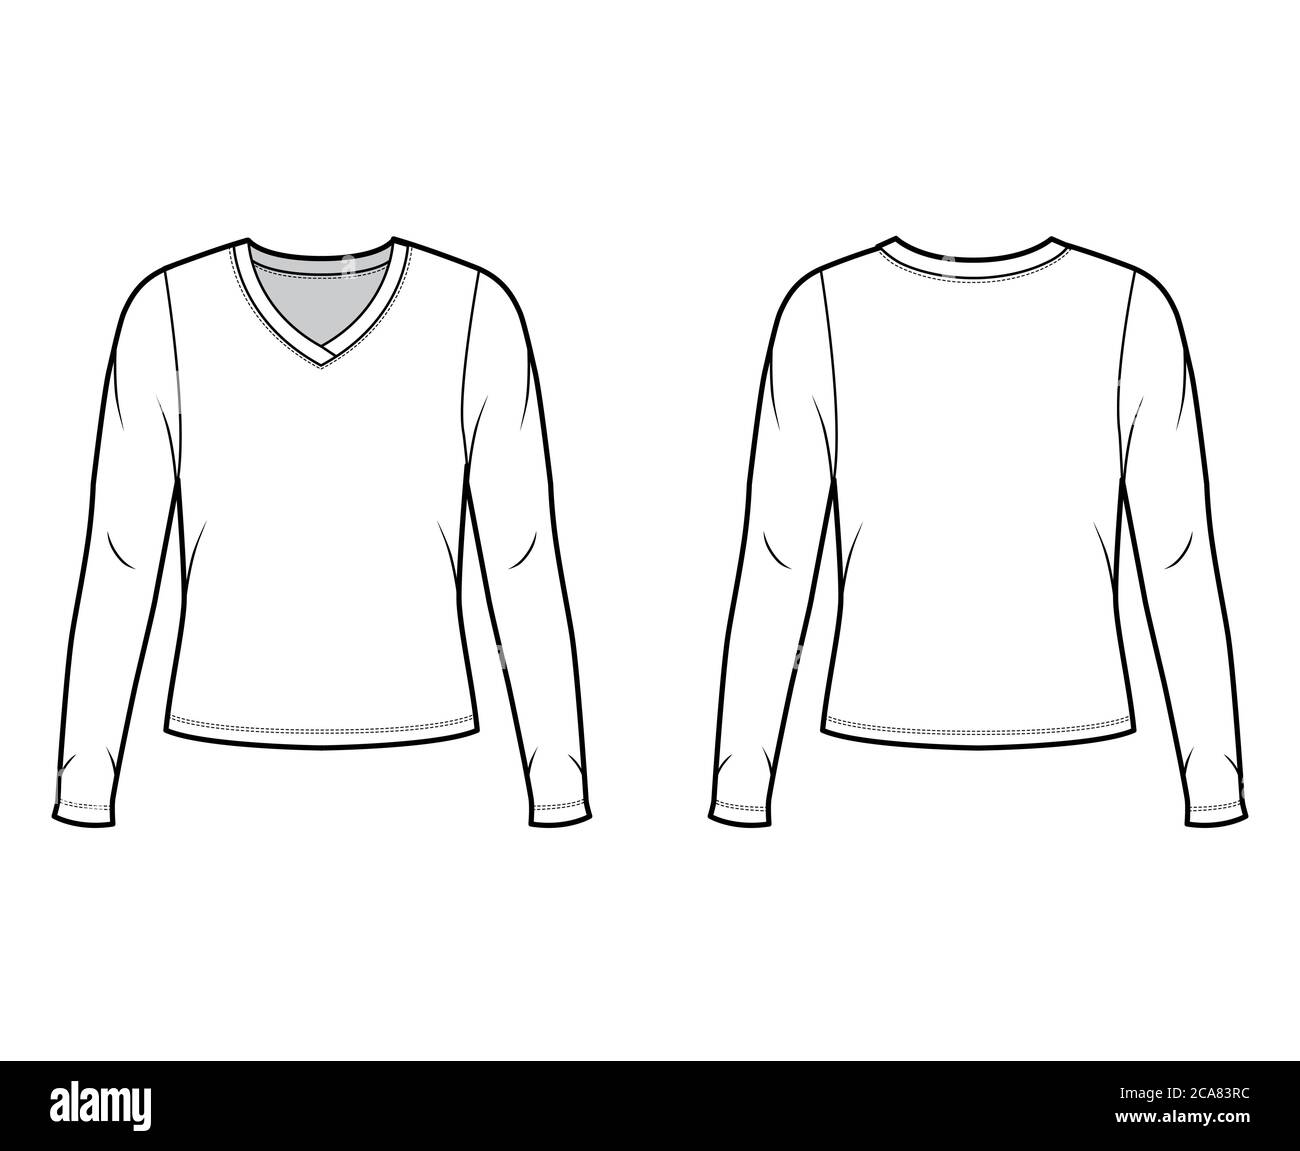 V-neck jersey sweater technical fashion illustration with long sleeves ...